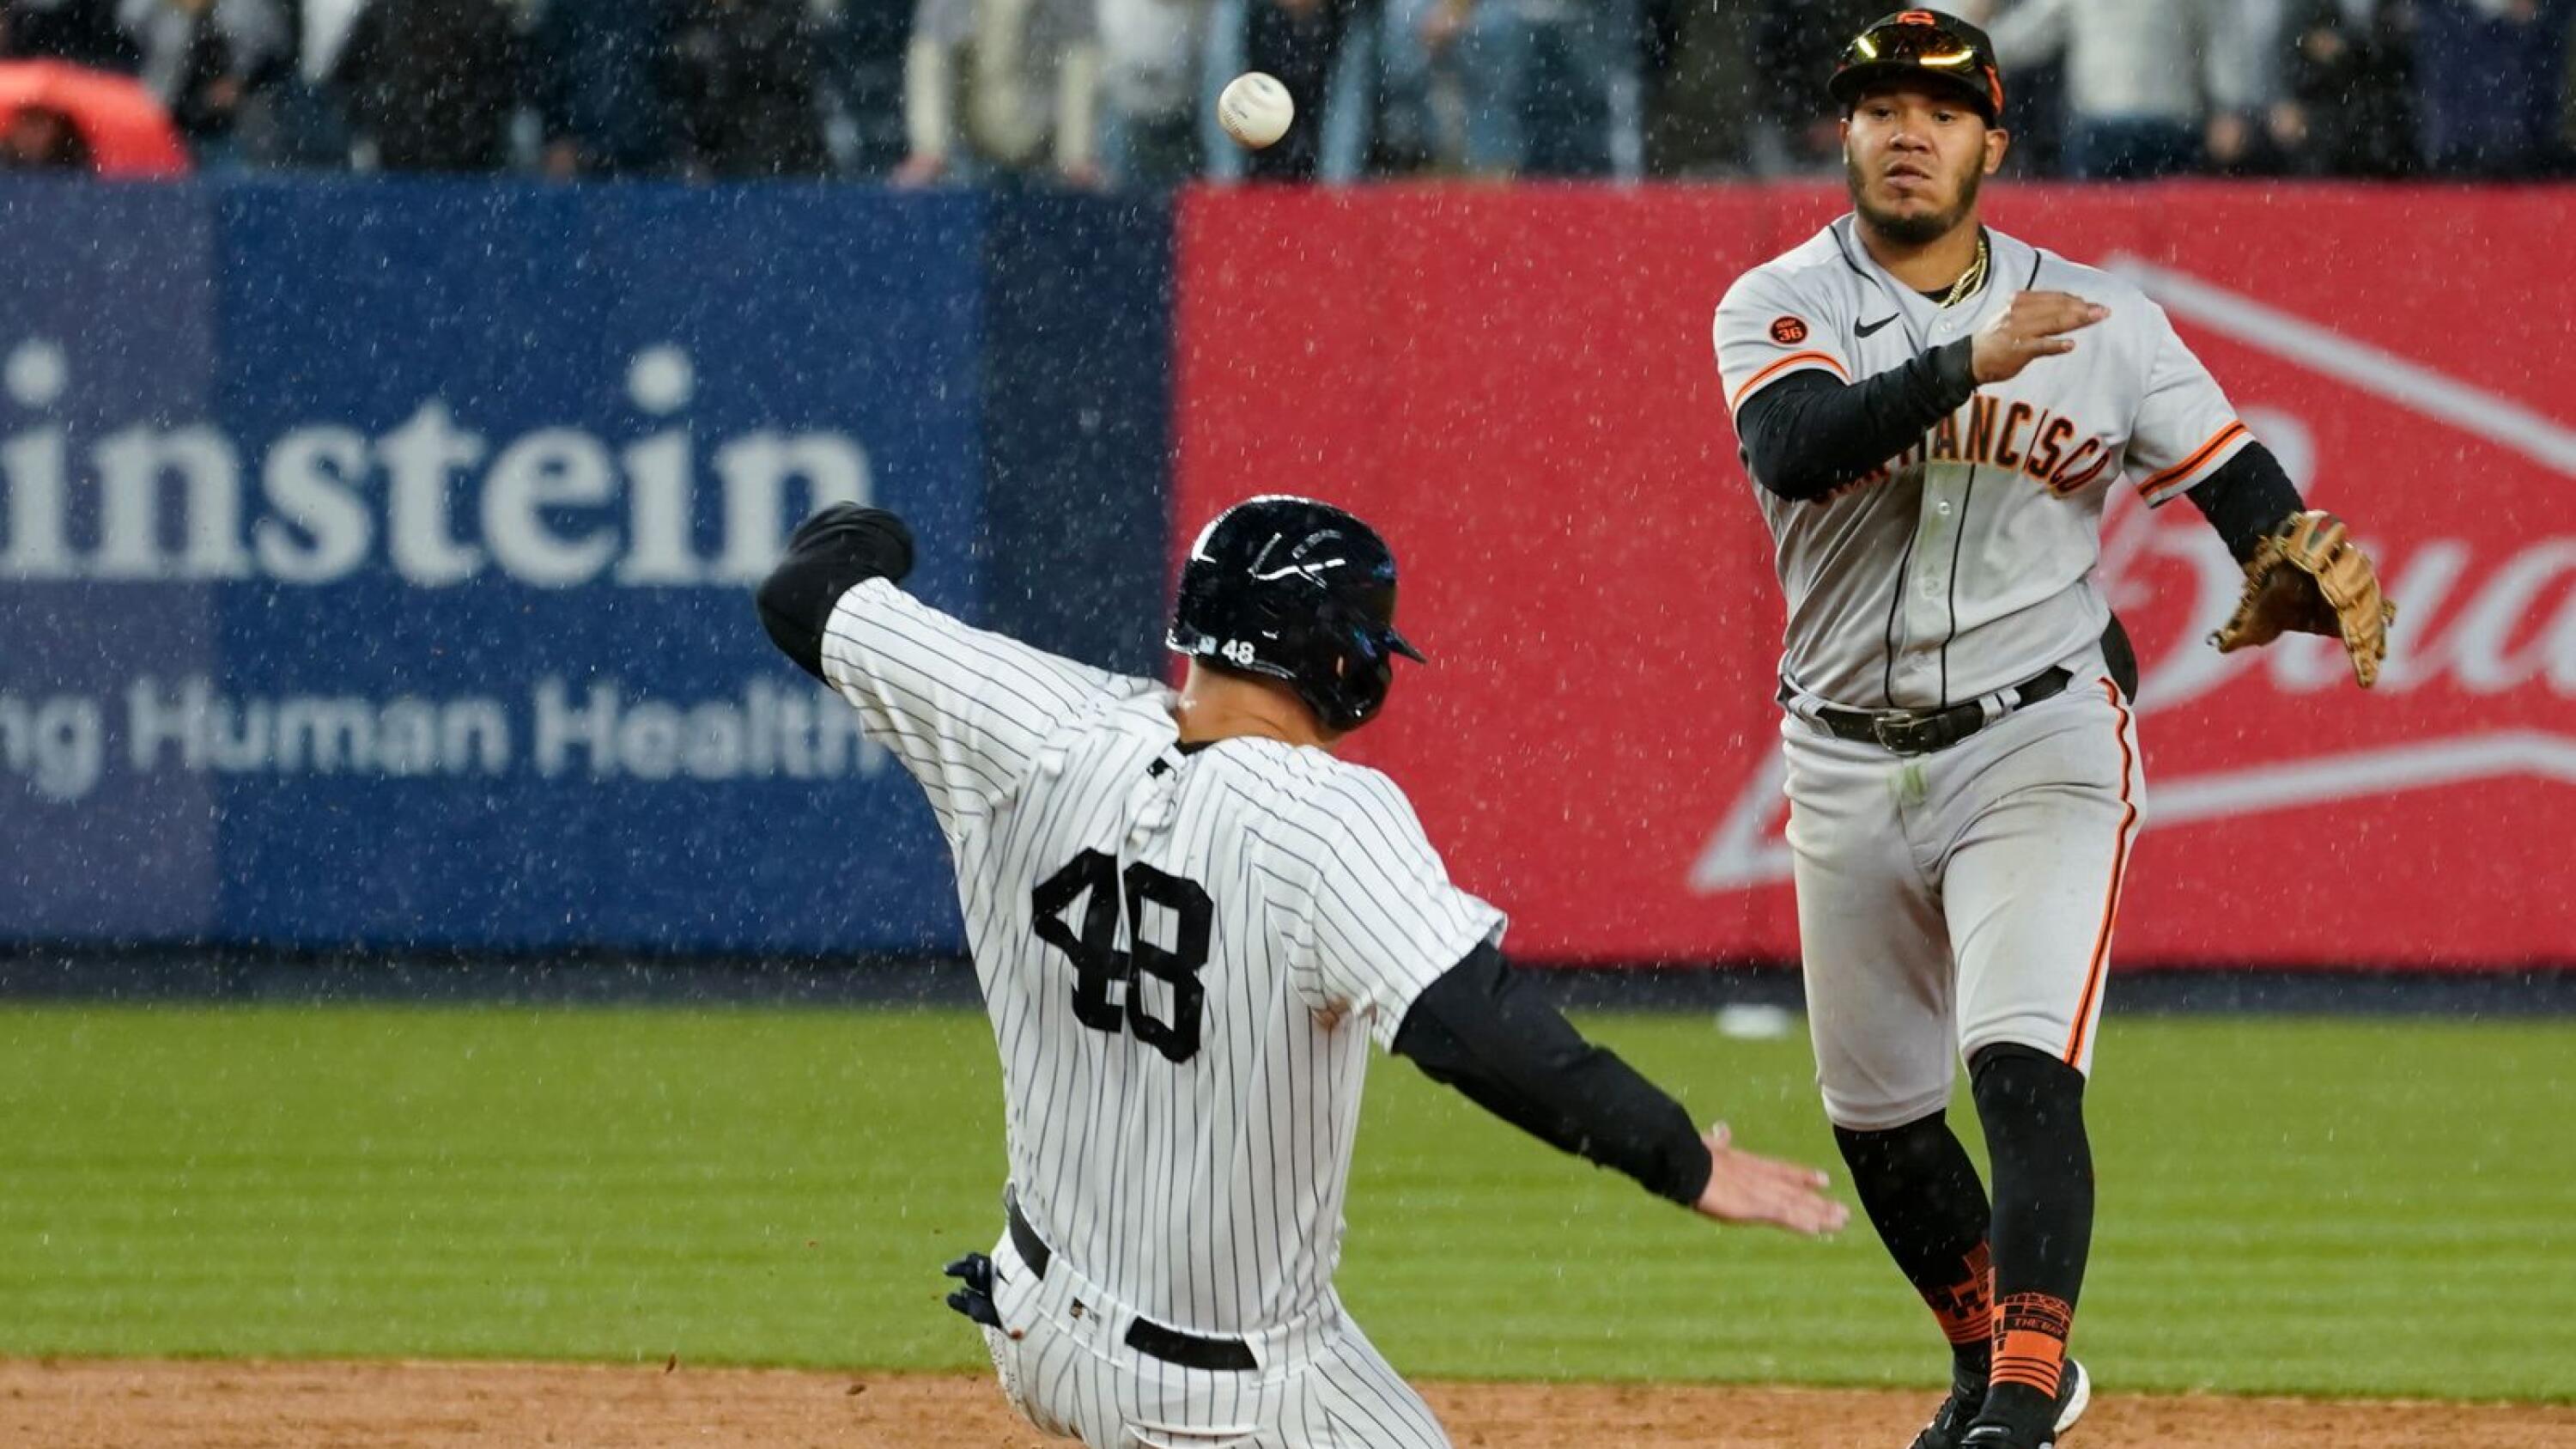 Stanton hits his 400th home run to lead Cole and the Yankees to a